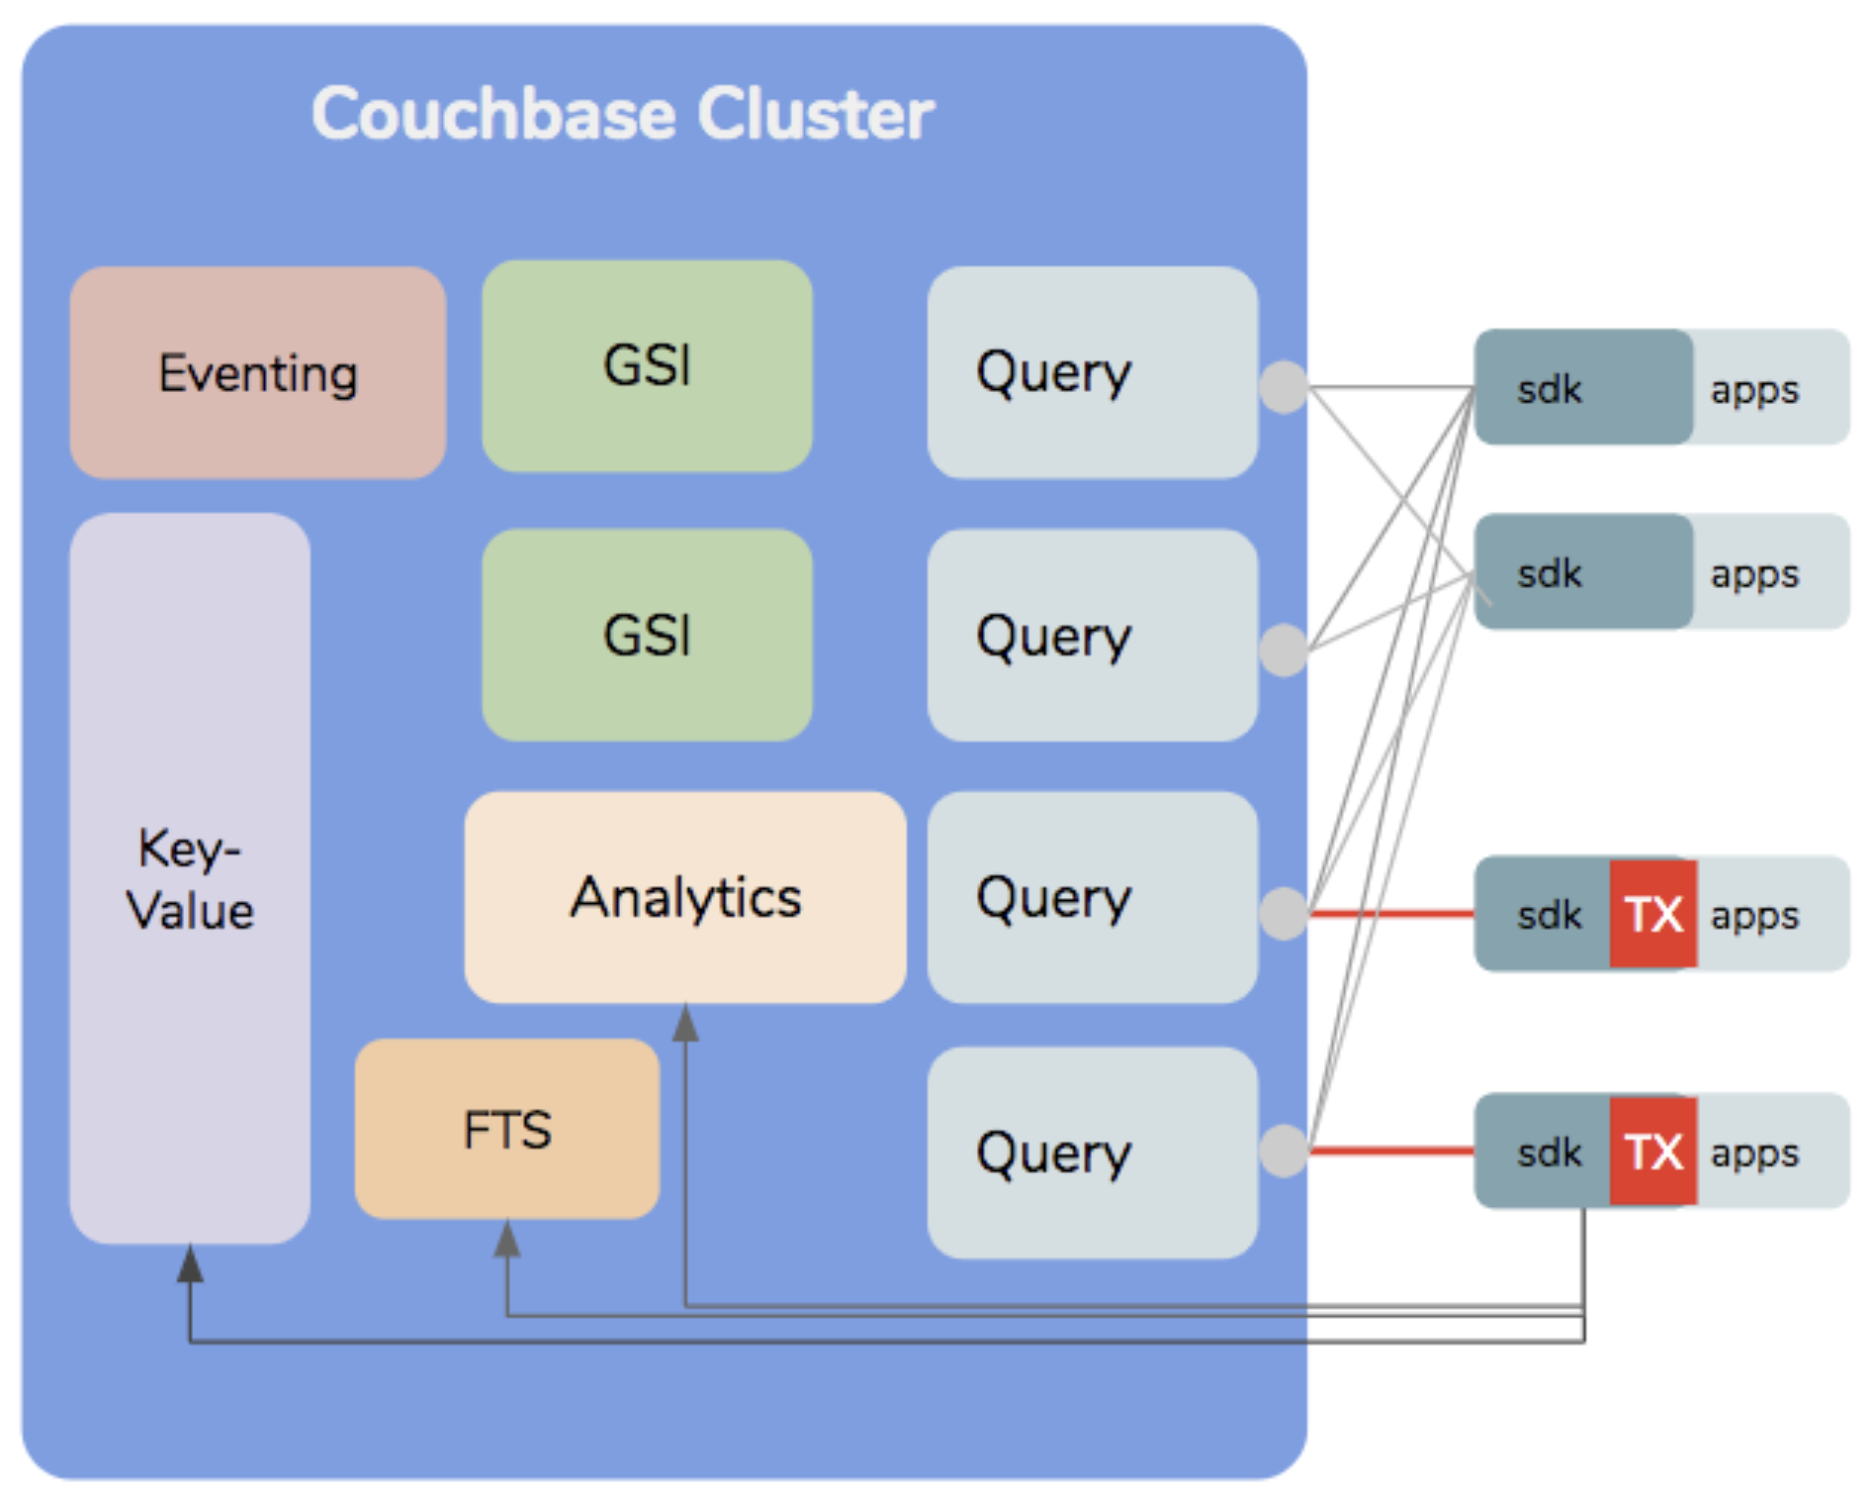 A Couchbase cluster with N1QL transactions